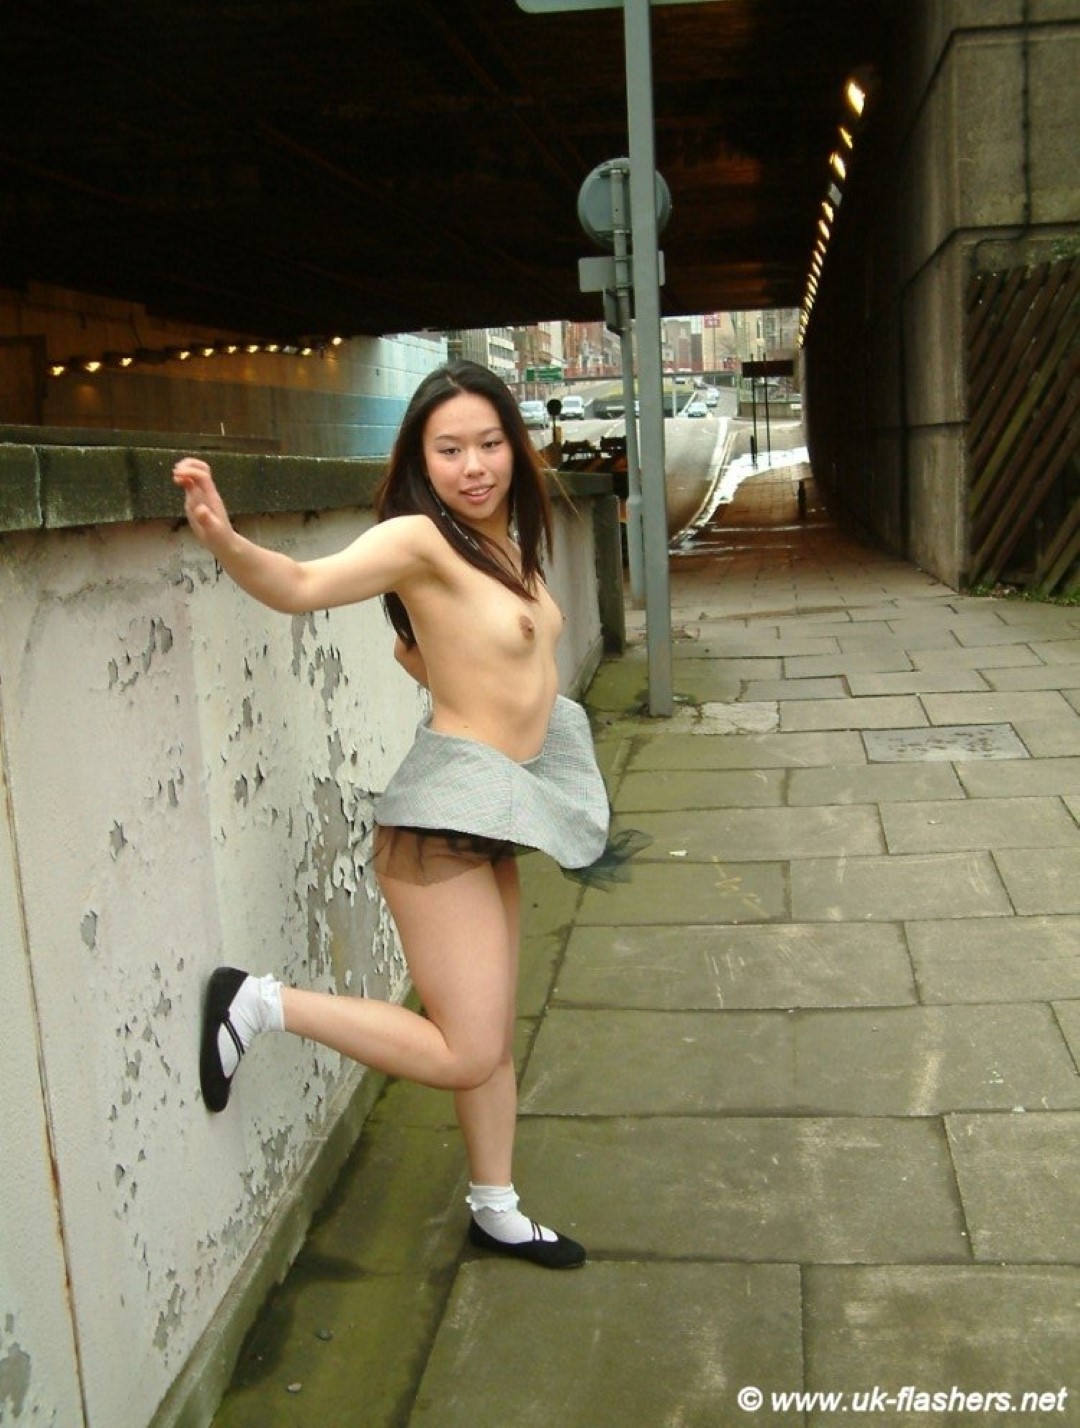 Its a city day out for lovely Asian exhibitionist Koko Lee #67168061